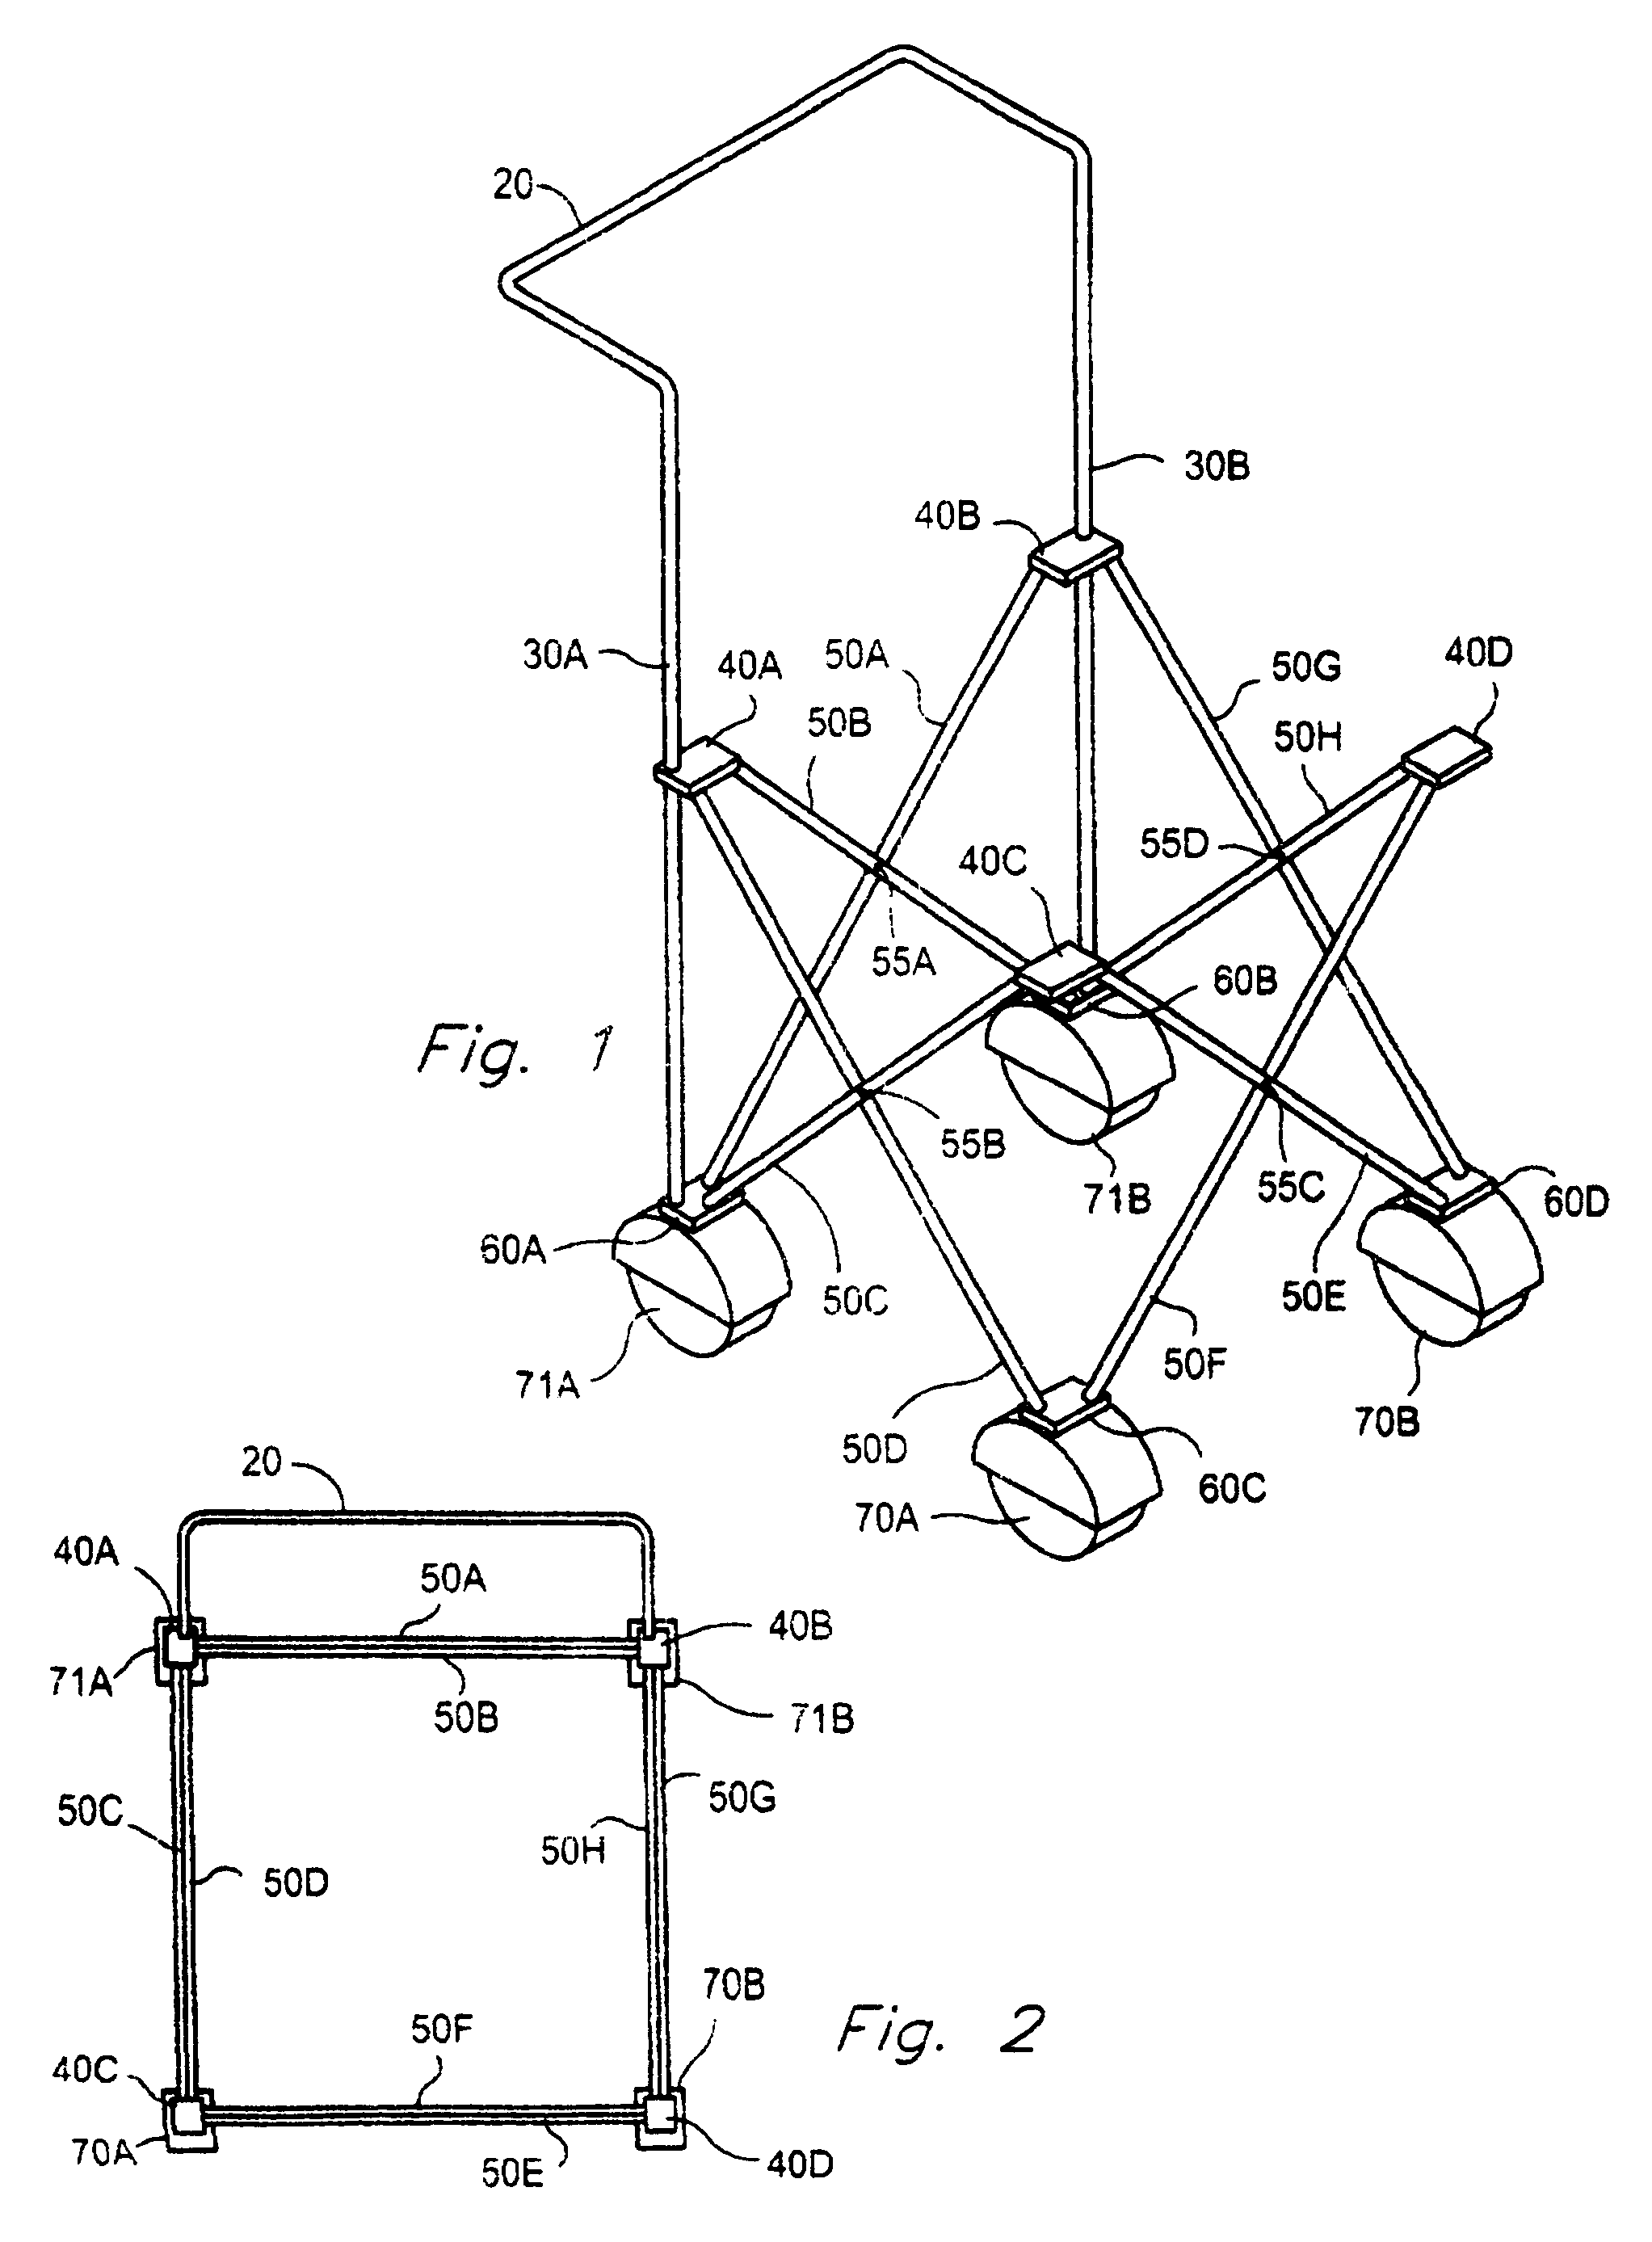 Assistive mobility device